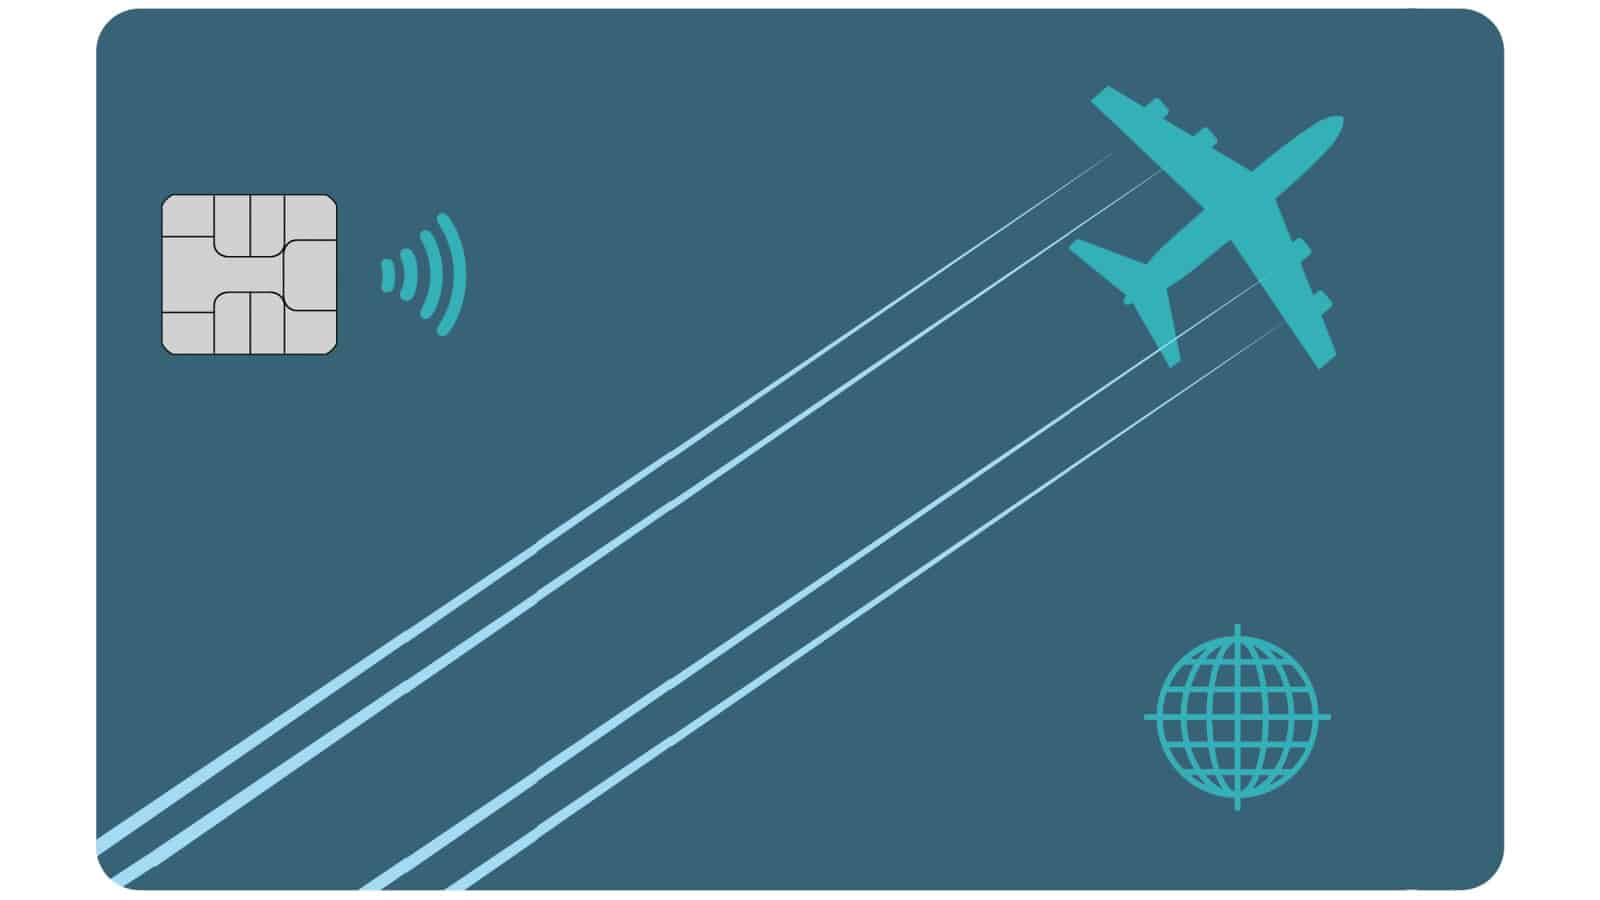 The image of an airliner leaves a contrail design across the face of an air miles reward credit card in this illustration about perks for air travelers. This is a 3-d illustration.